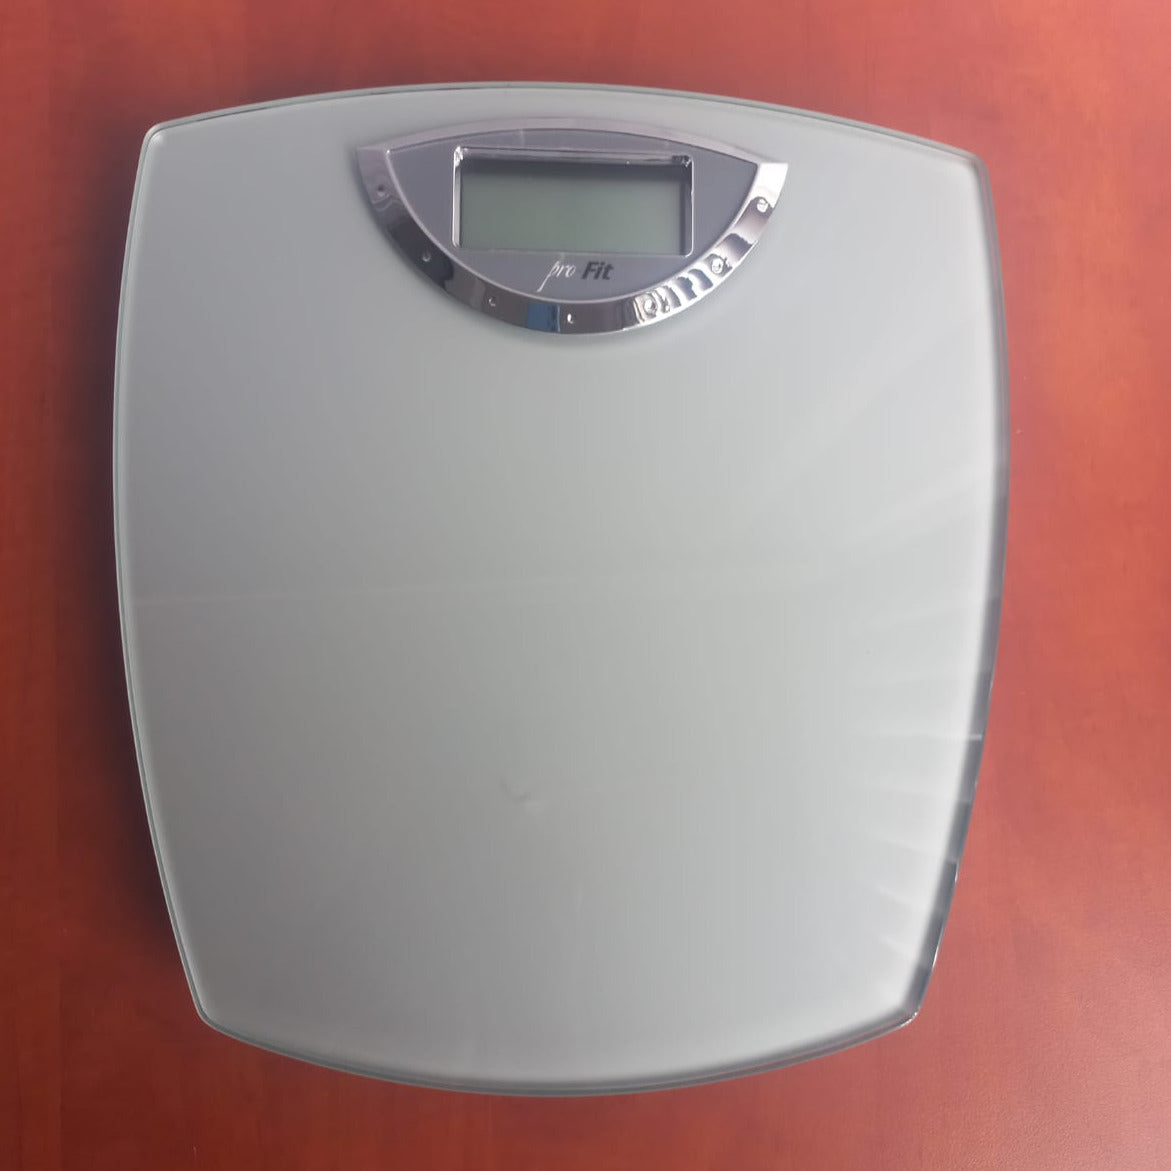 Chrome and glass digital scale